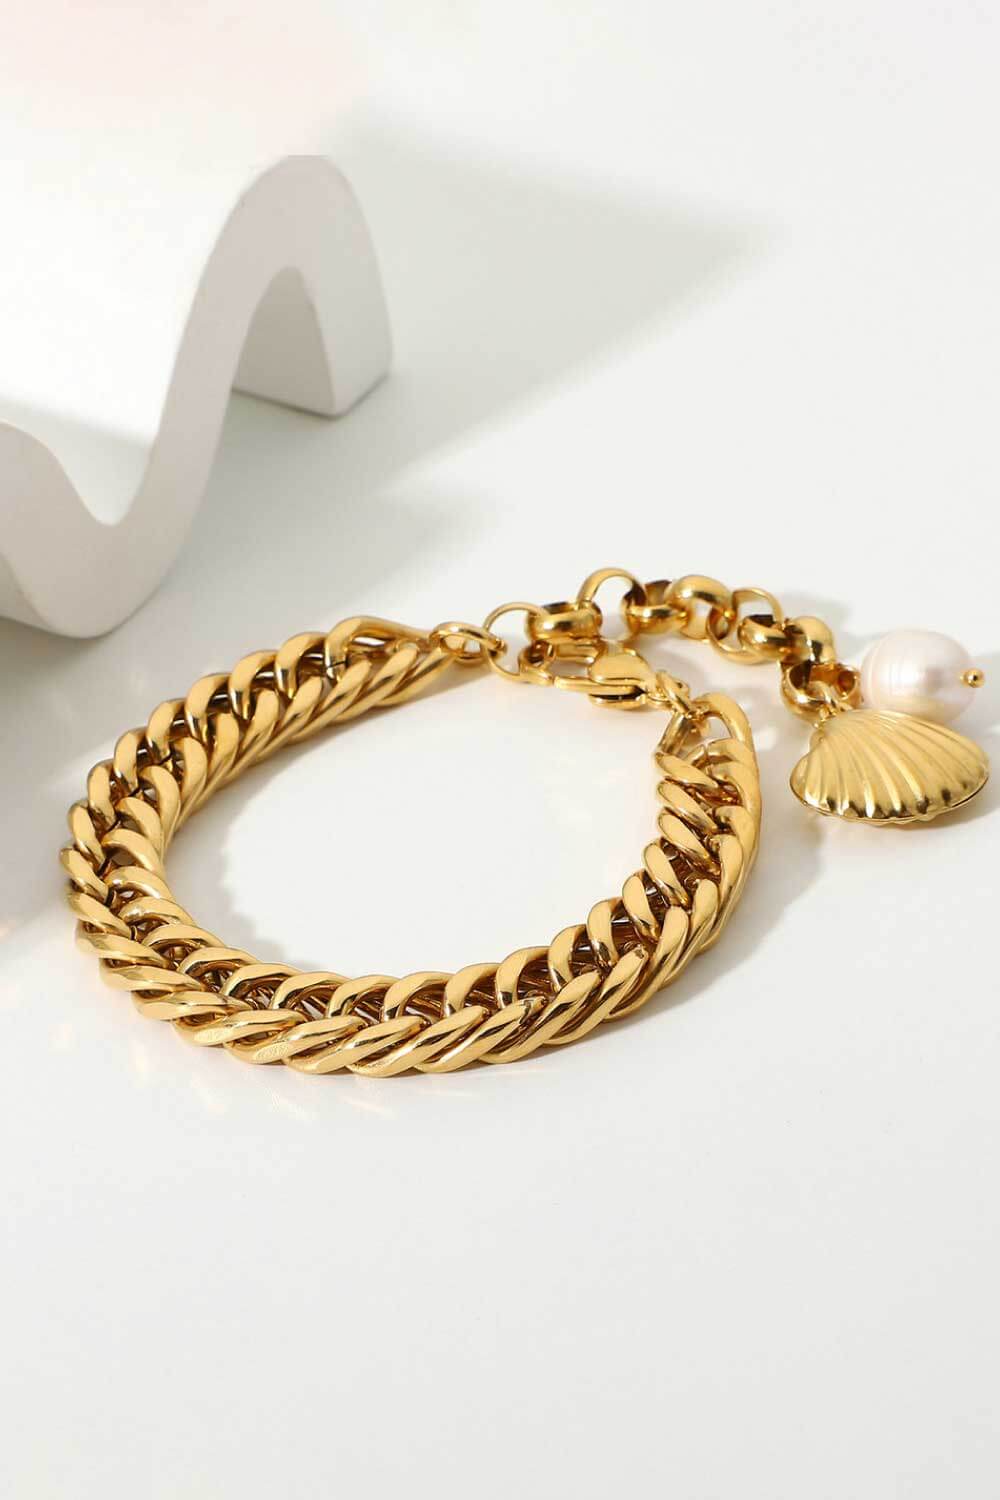 18K Gold-Plated Curb Chain Bracelet BLUE ZONE PLANET